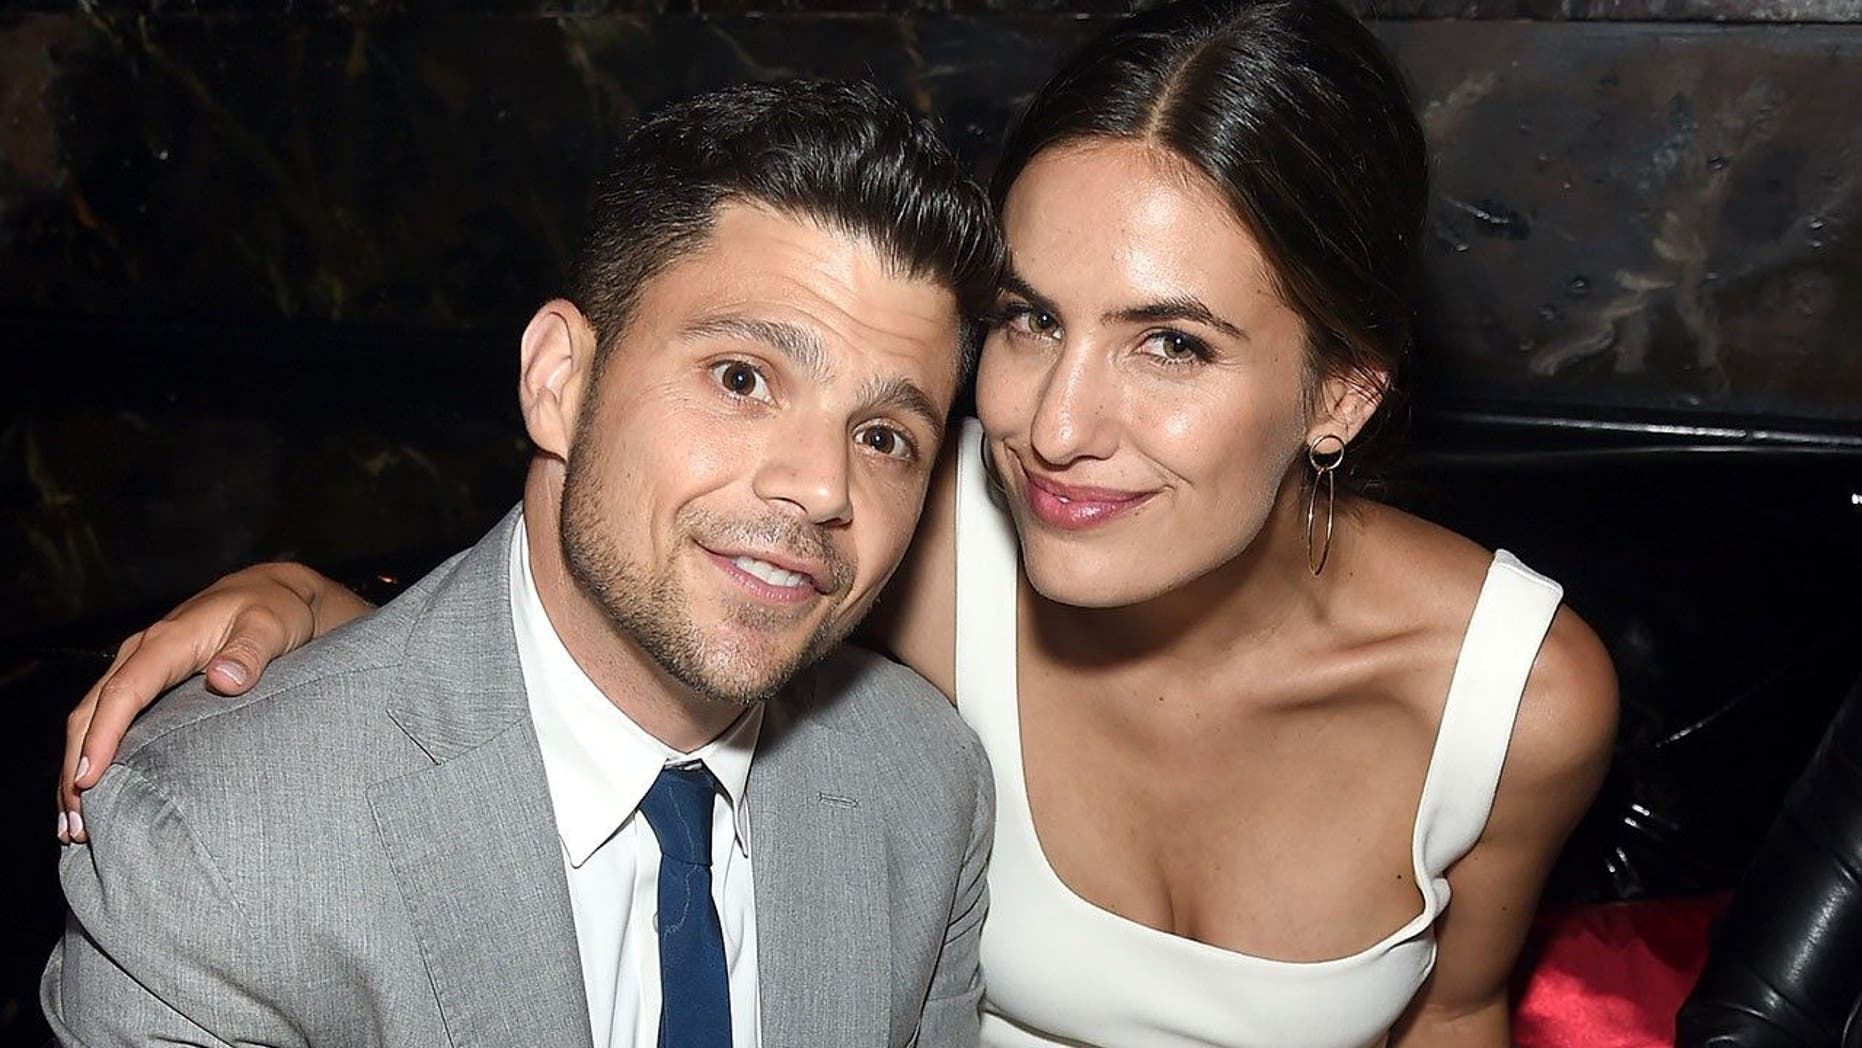 ‘Entourage’ alum Jerry Ferrara reveals he and his wife are expecting a son after losing baby last year